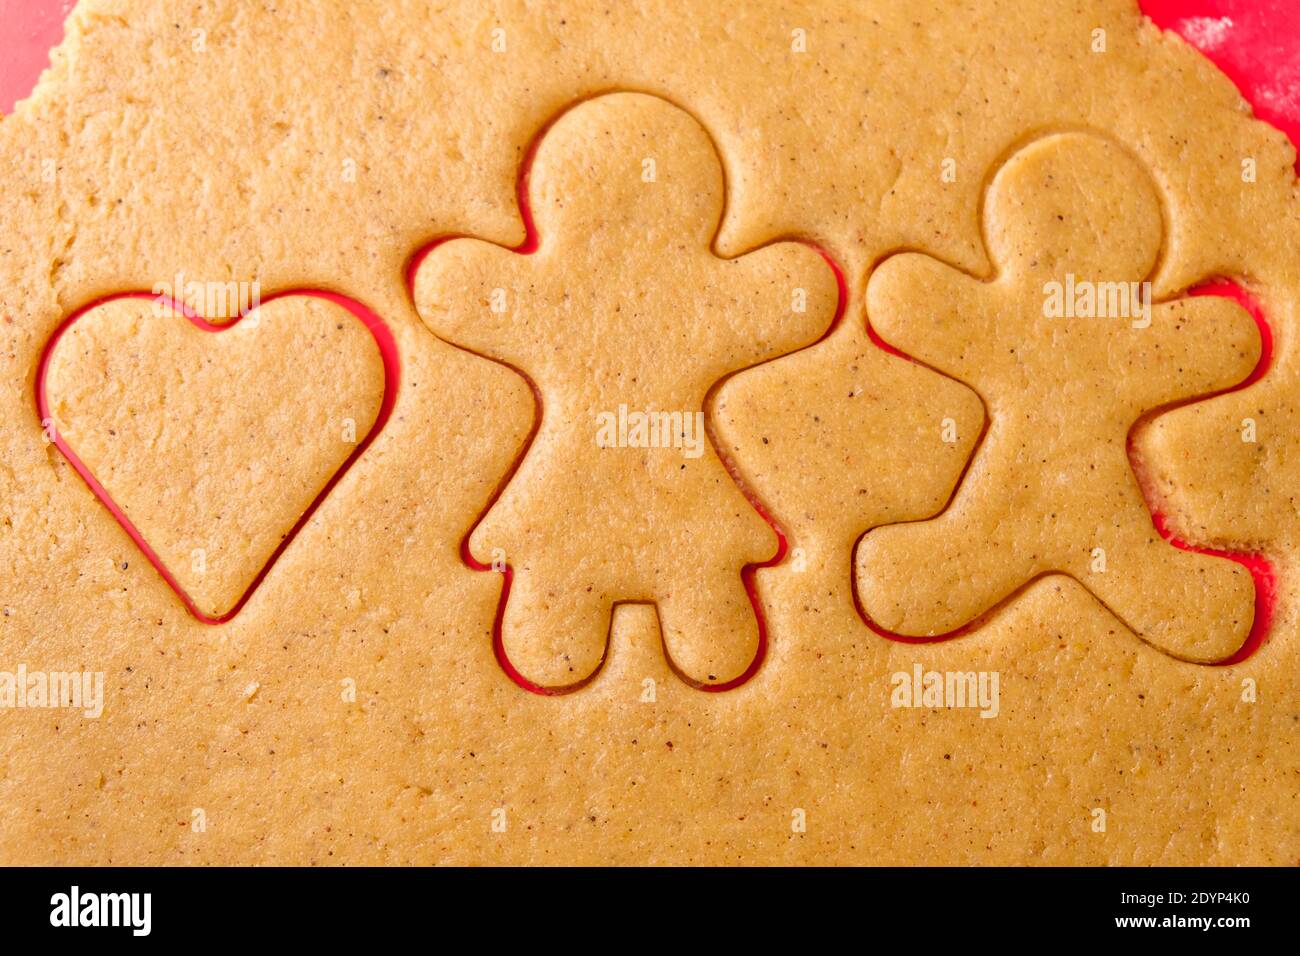 https://c8.alamy.com/comp/2DYP4K0/cutting-gingerbread-shapes-family-or-love-couple-concept-from-dough-for-st-valentines-day-2DYP4K0.jpg